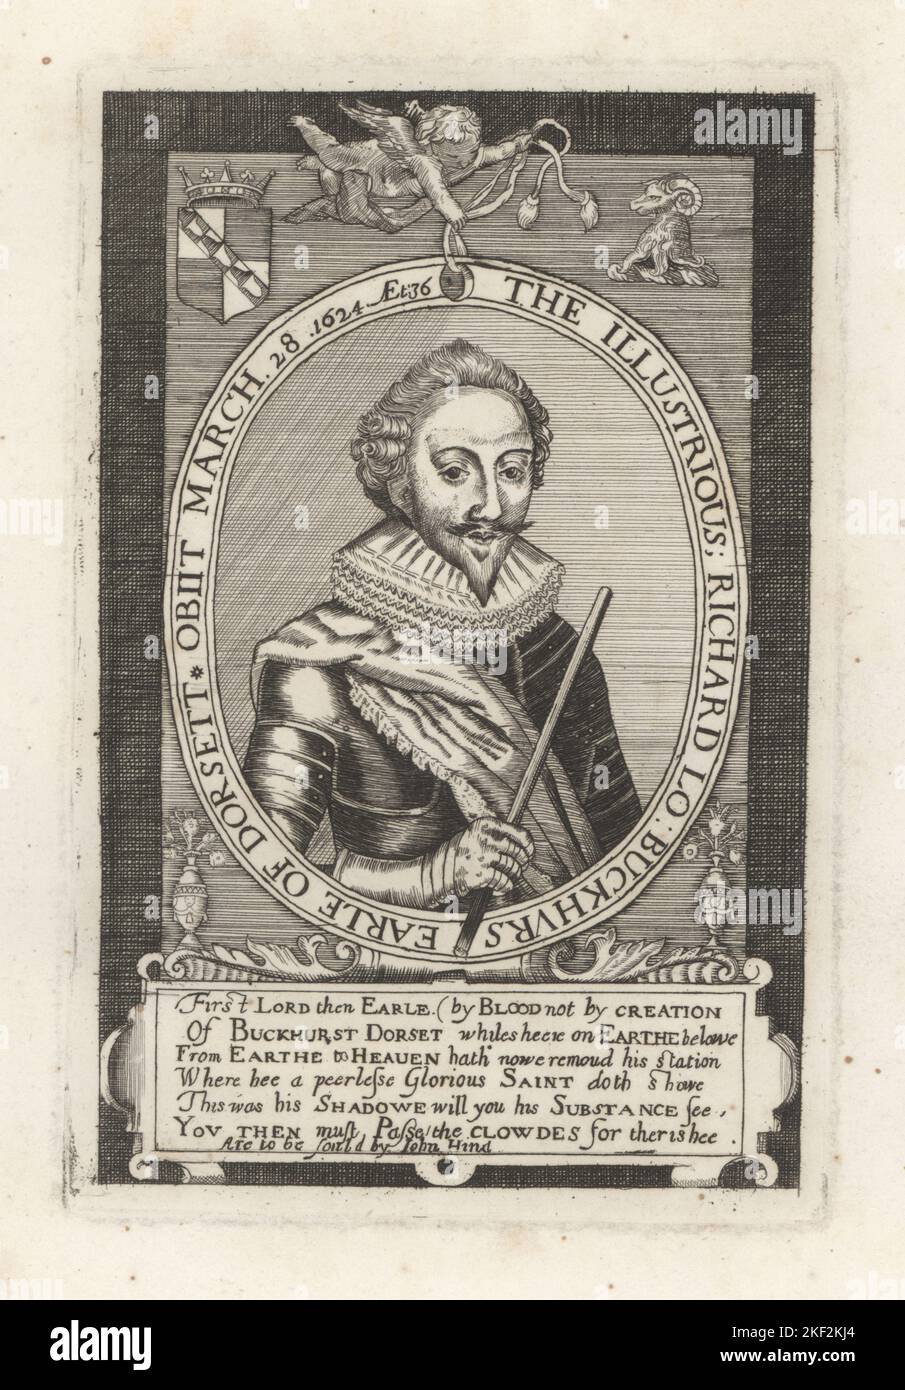 Richard Sackville, Lord Buckhurst, 3rd Earl of Dorset, 1589-1624. Gambler, wastrel, womaniser, debtor. Portrait in ruff collar, sash, breastplate and armour, gauntlet holding a staff. Richard Buckhurst, Earl of Dorset, died 1624, aged 36. From a rare print to be sold by John Hinde. Copperplate engraving from Samuel Woodburn’s Gallery of Rare Portraits Consisting of Original Plates, George Jones, 102 St Martin’s Lane, London, 1816. Stock Photo